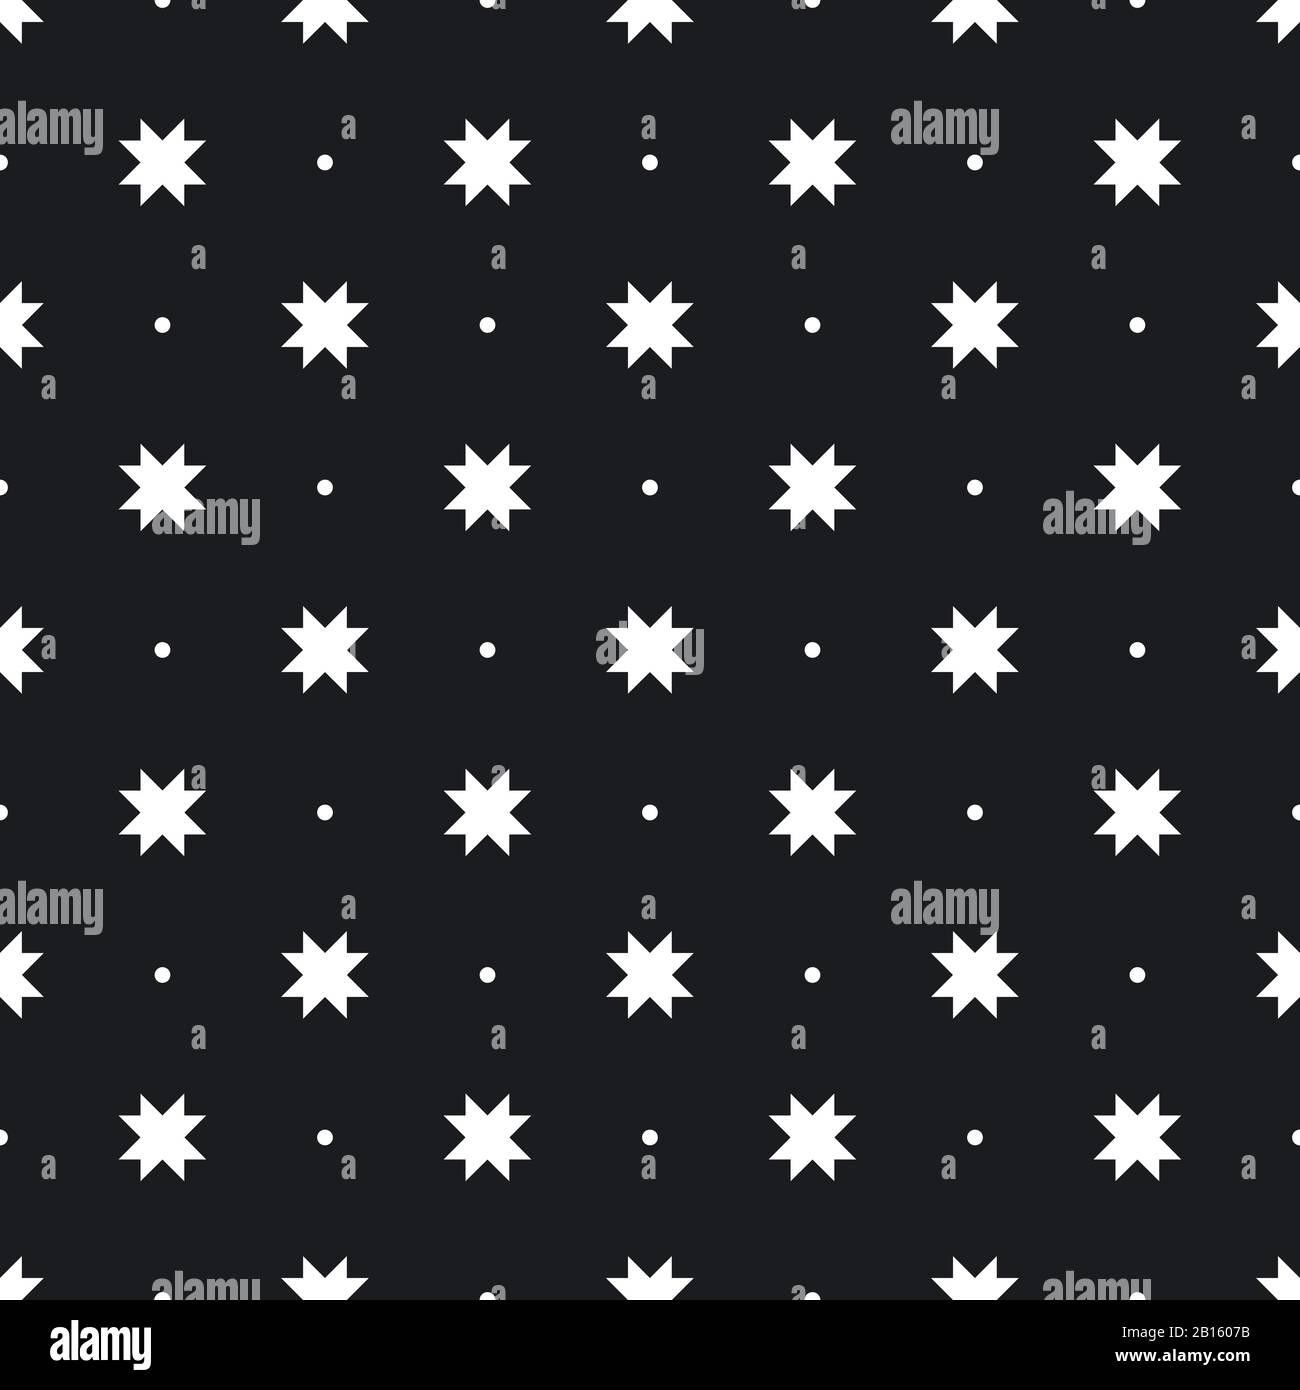 Vector geometric texture. Seamless pattern with stars and dots. Simple monochrome background. Black and white decorative design element for decoration Stock Vector